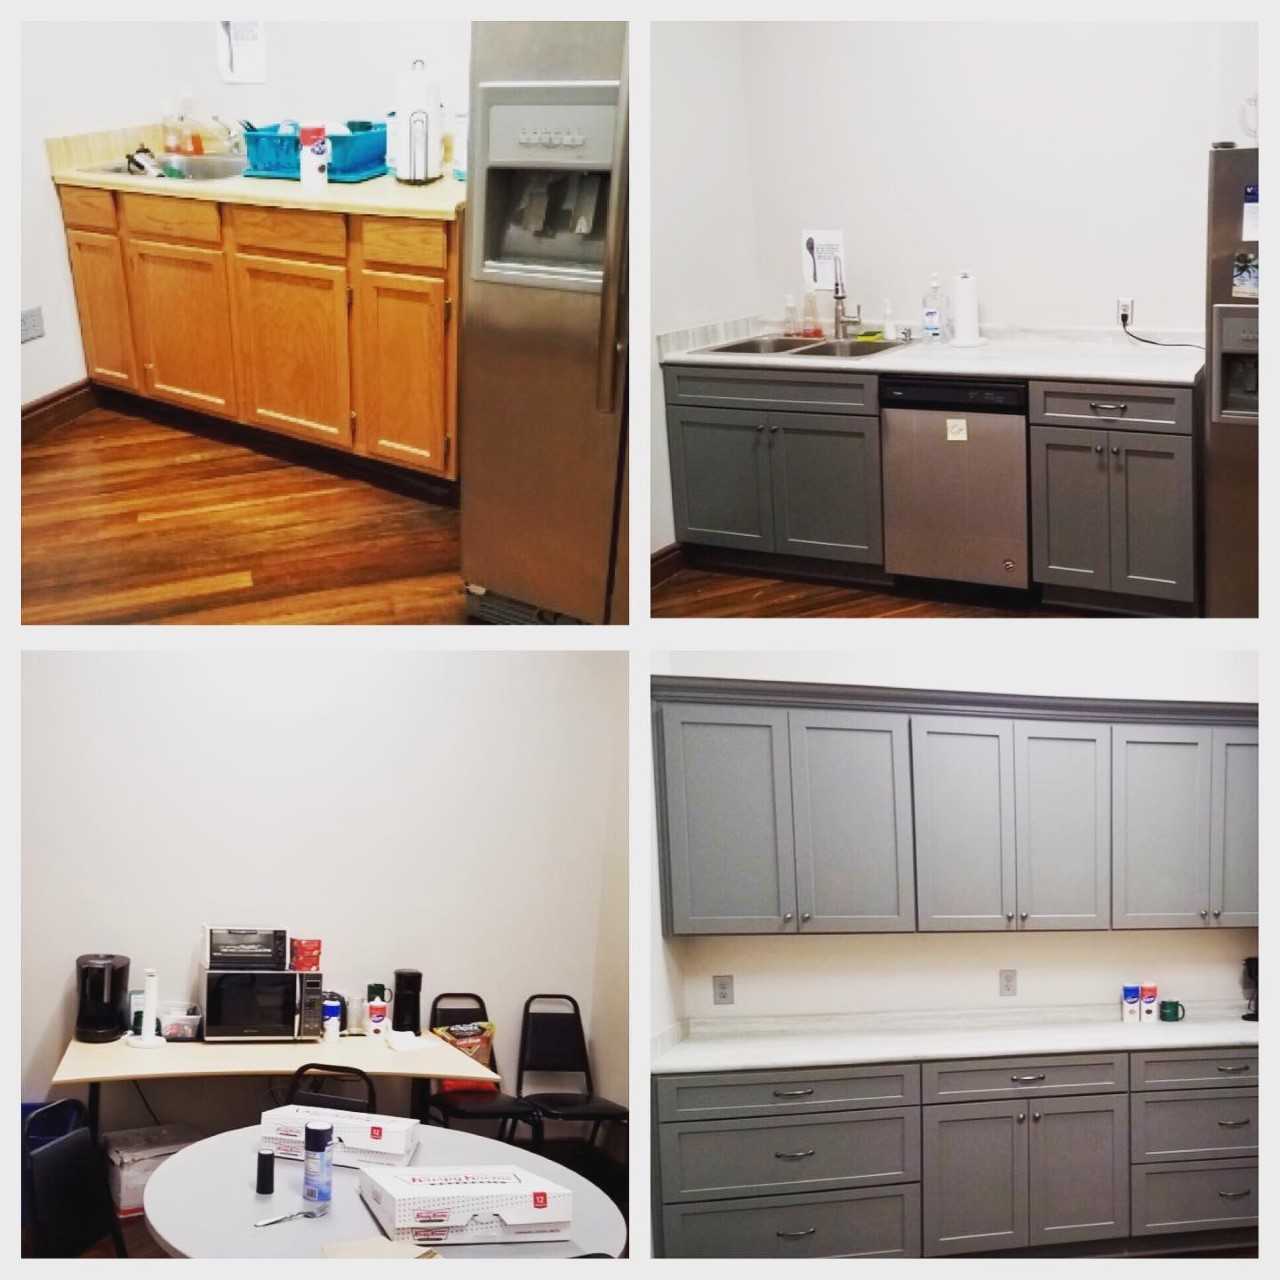 An updated office kitchen with new cabinets by Maestro. Photo courtesy of Maestro Maintenance Management